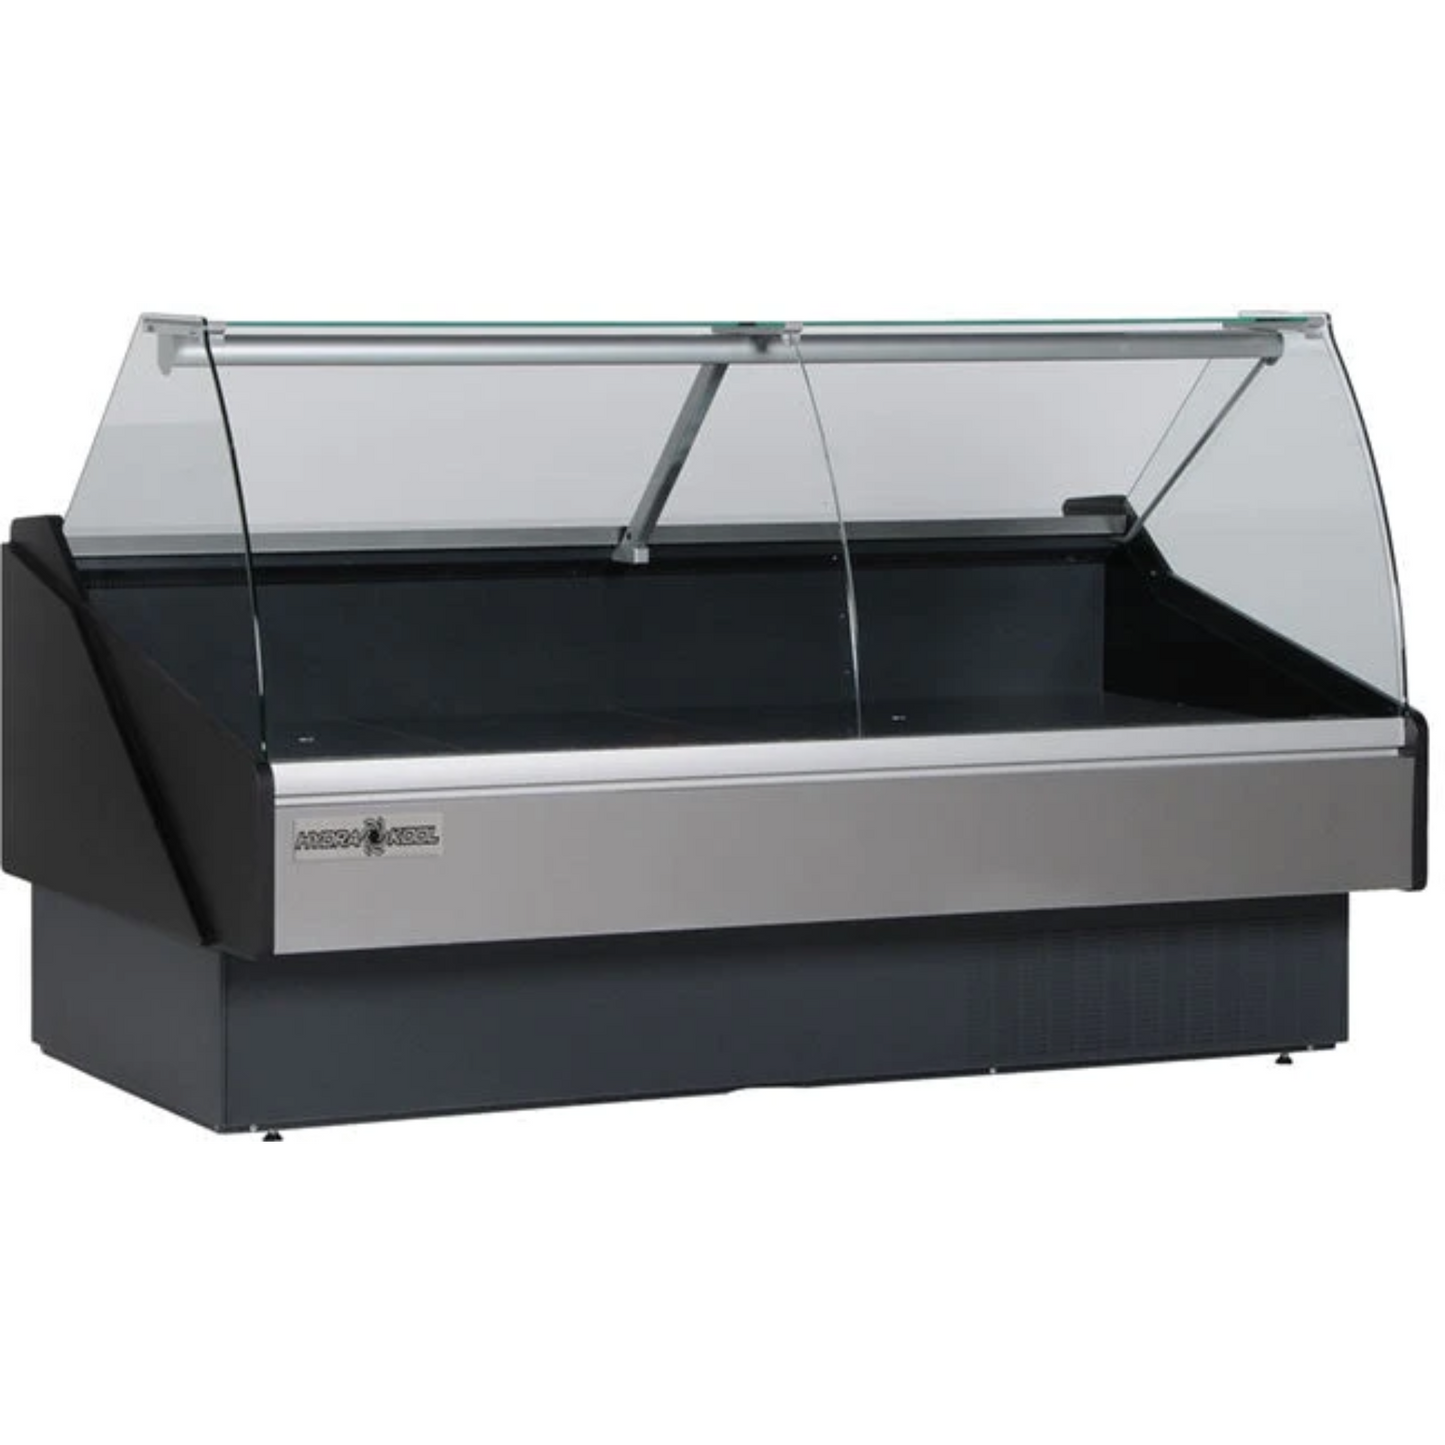 Hydra-Kool KFM-CG-60-S 60" Fresh Meat & Deli Case Curved Glass Self-Contained